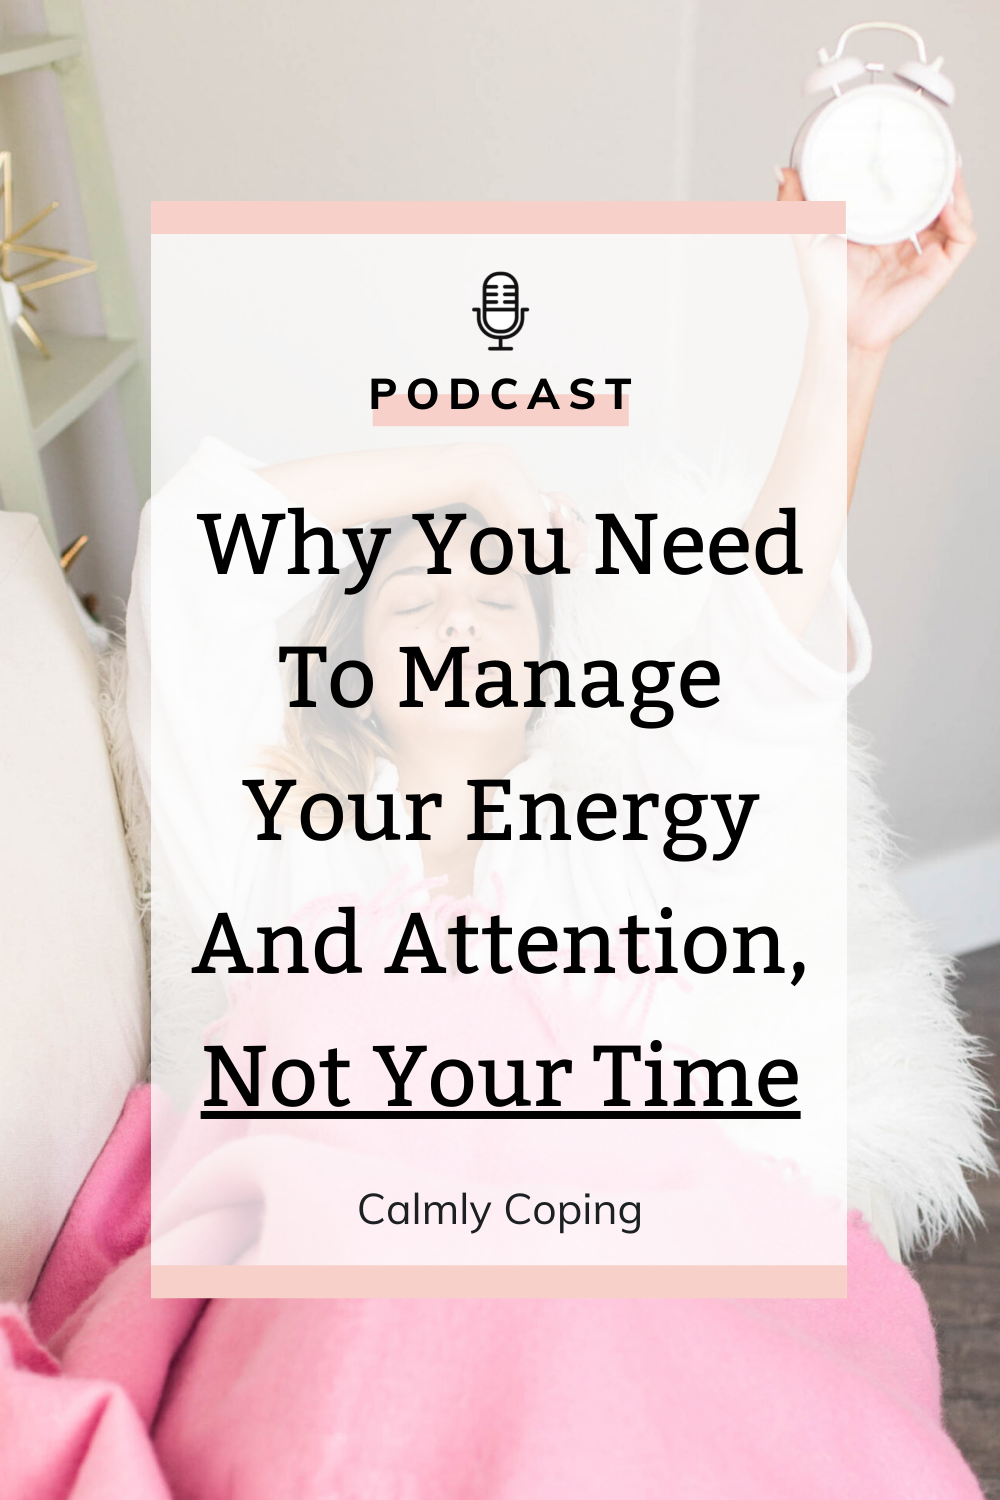 Why You Need To Manage Your Energy And Attention, Not Your Time